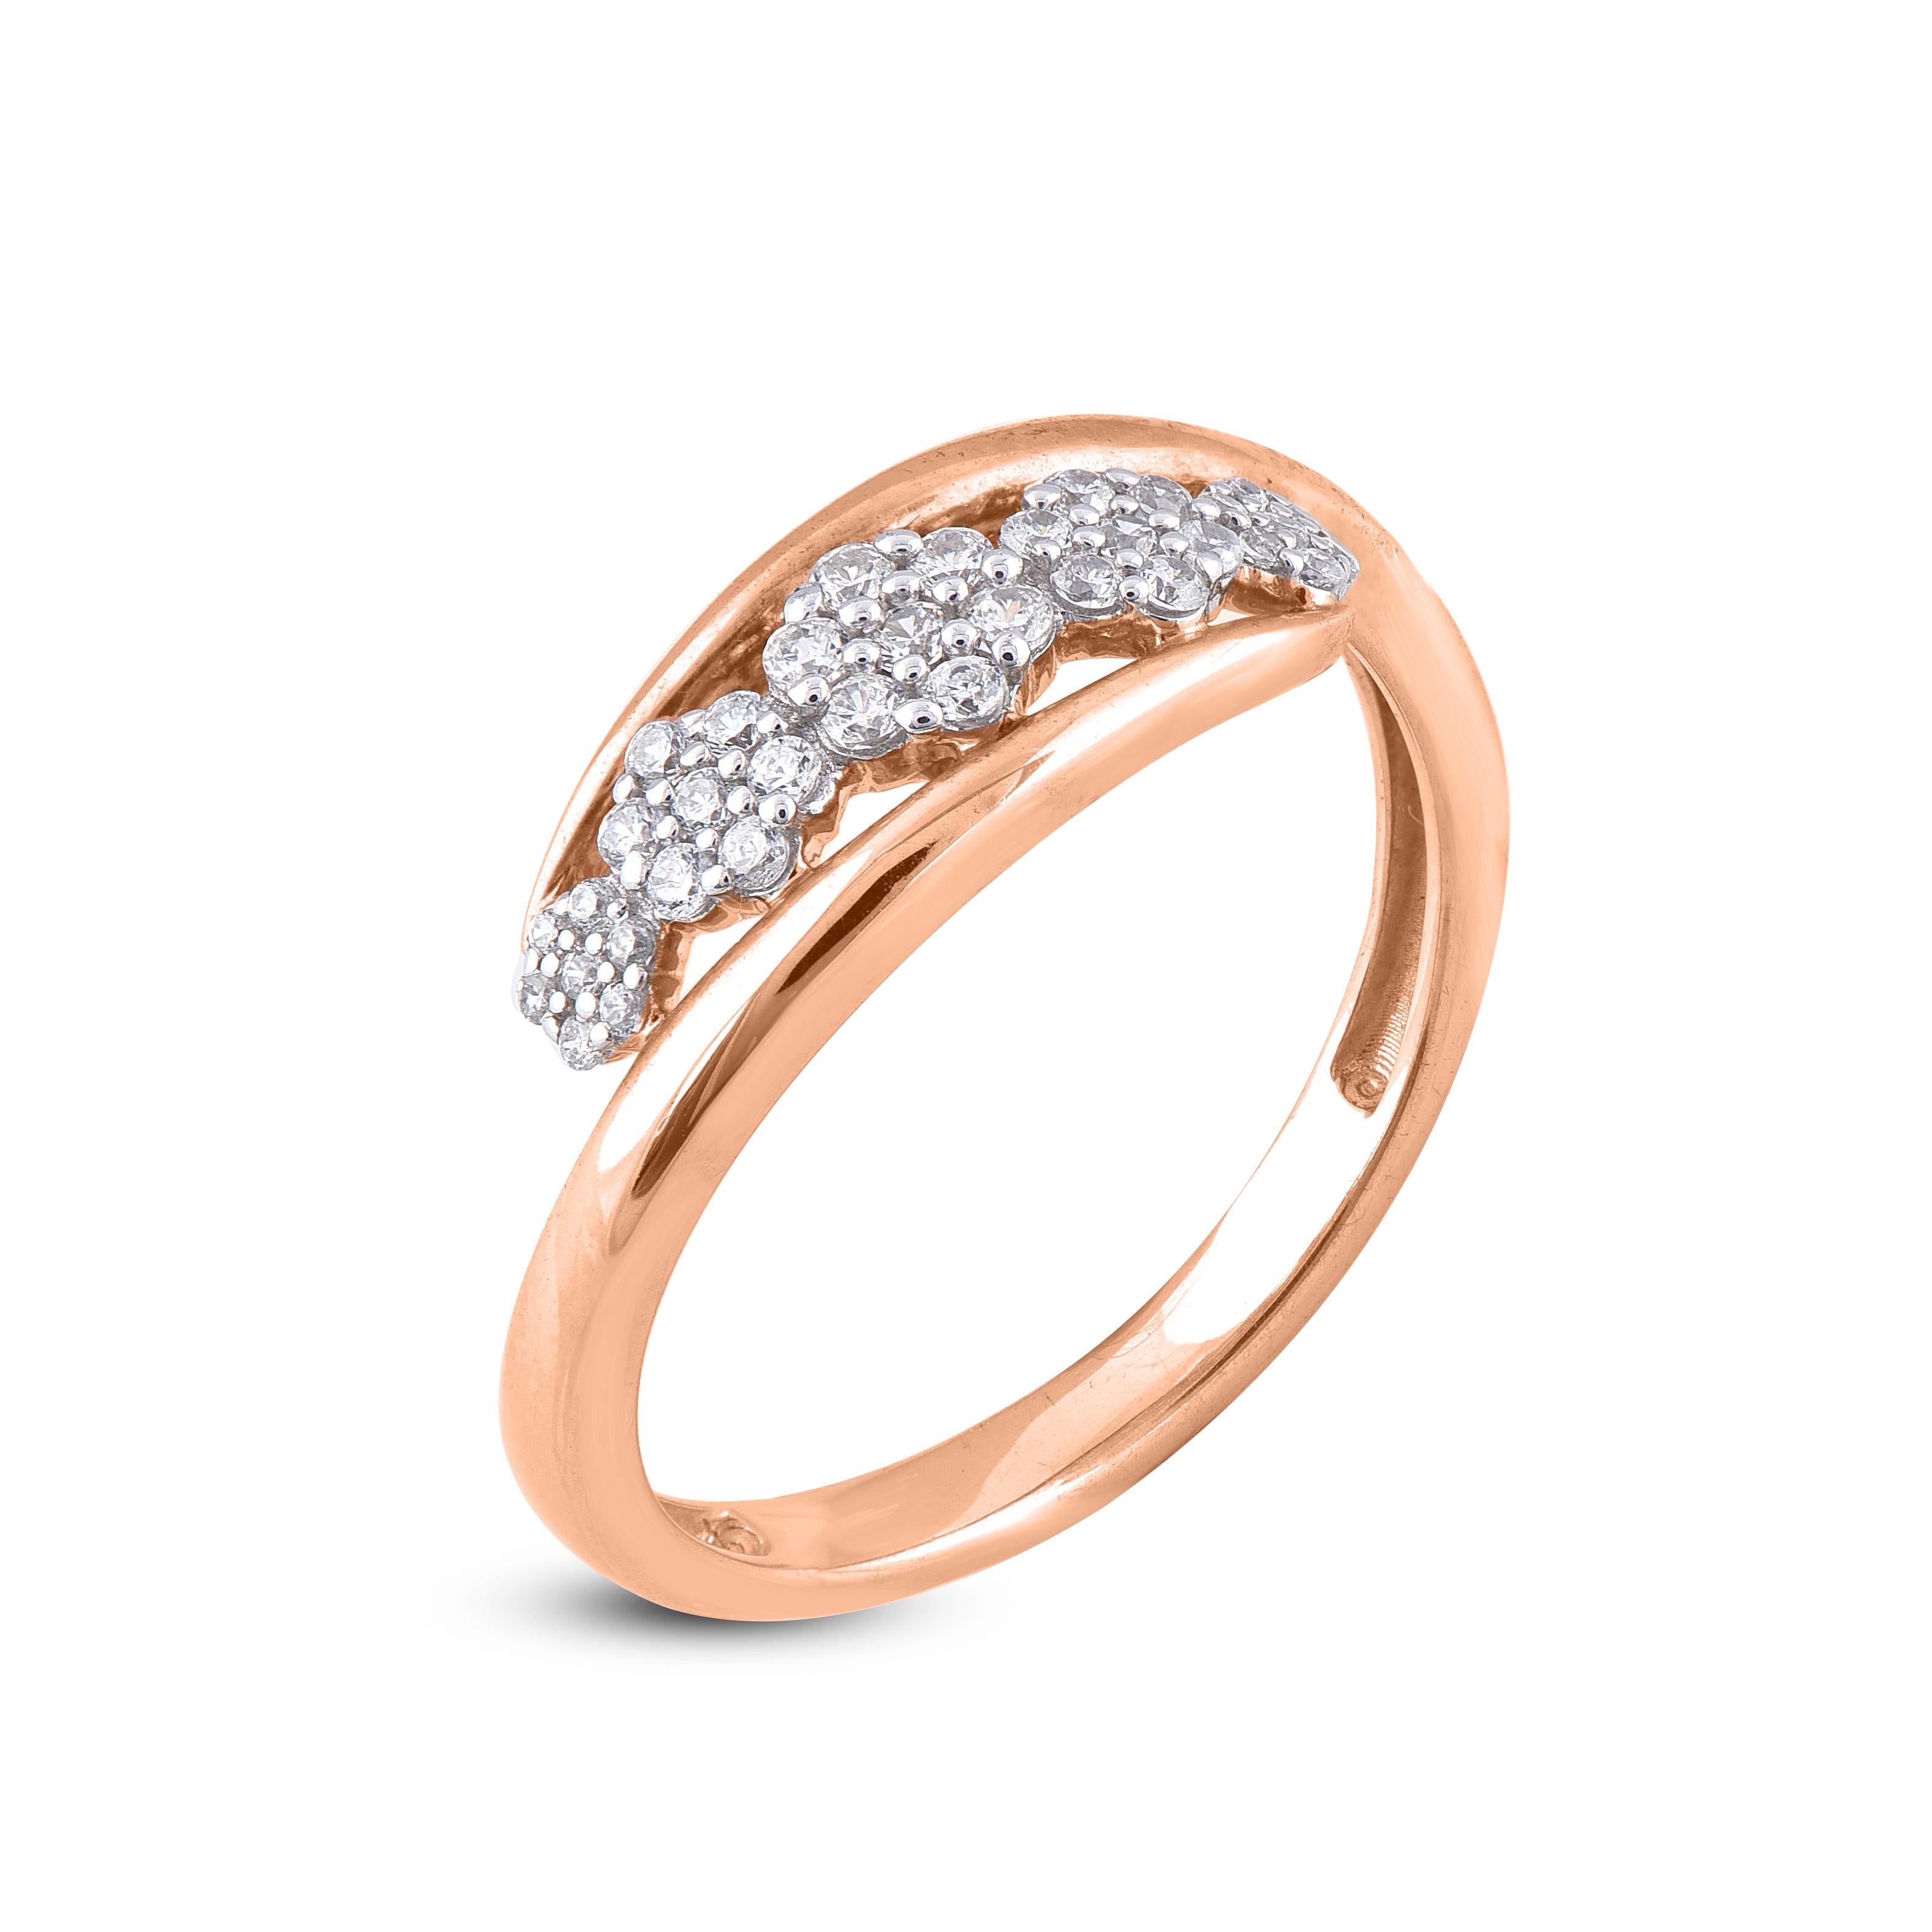 Stunning and classic, this diamond cluster crossover ring is crafted in 14K rose gold. This crossover wedding band ring is studded with sparkling 35 round white diamonds in secured prong setting. The diamonds are natural, not-treated and